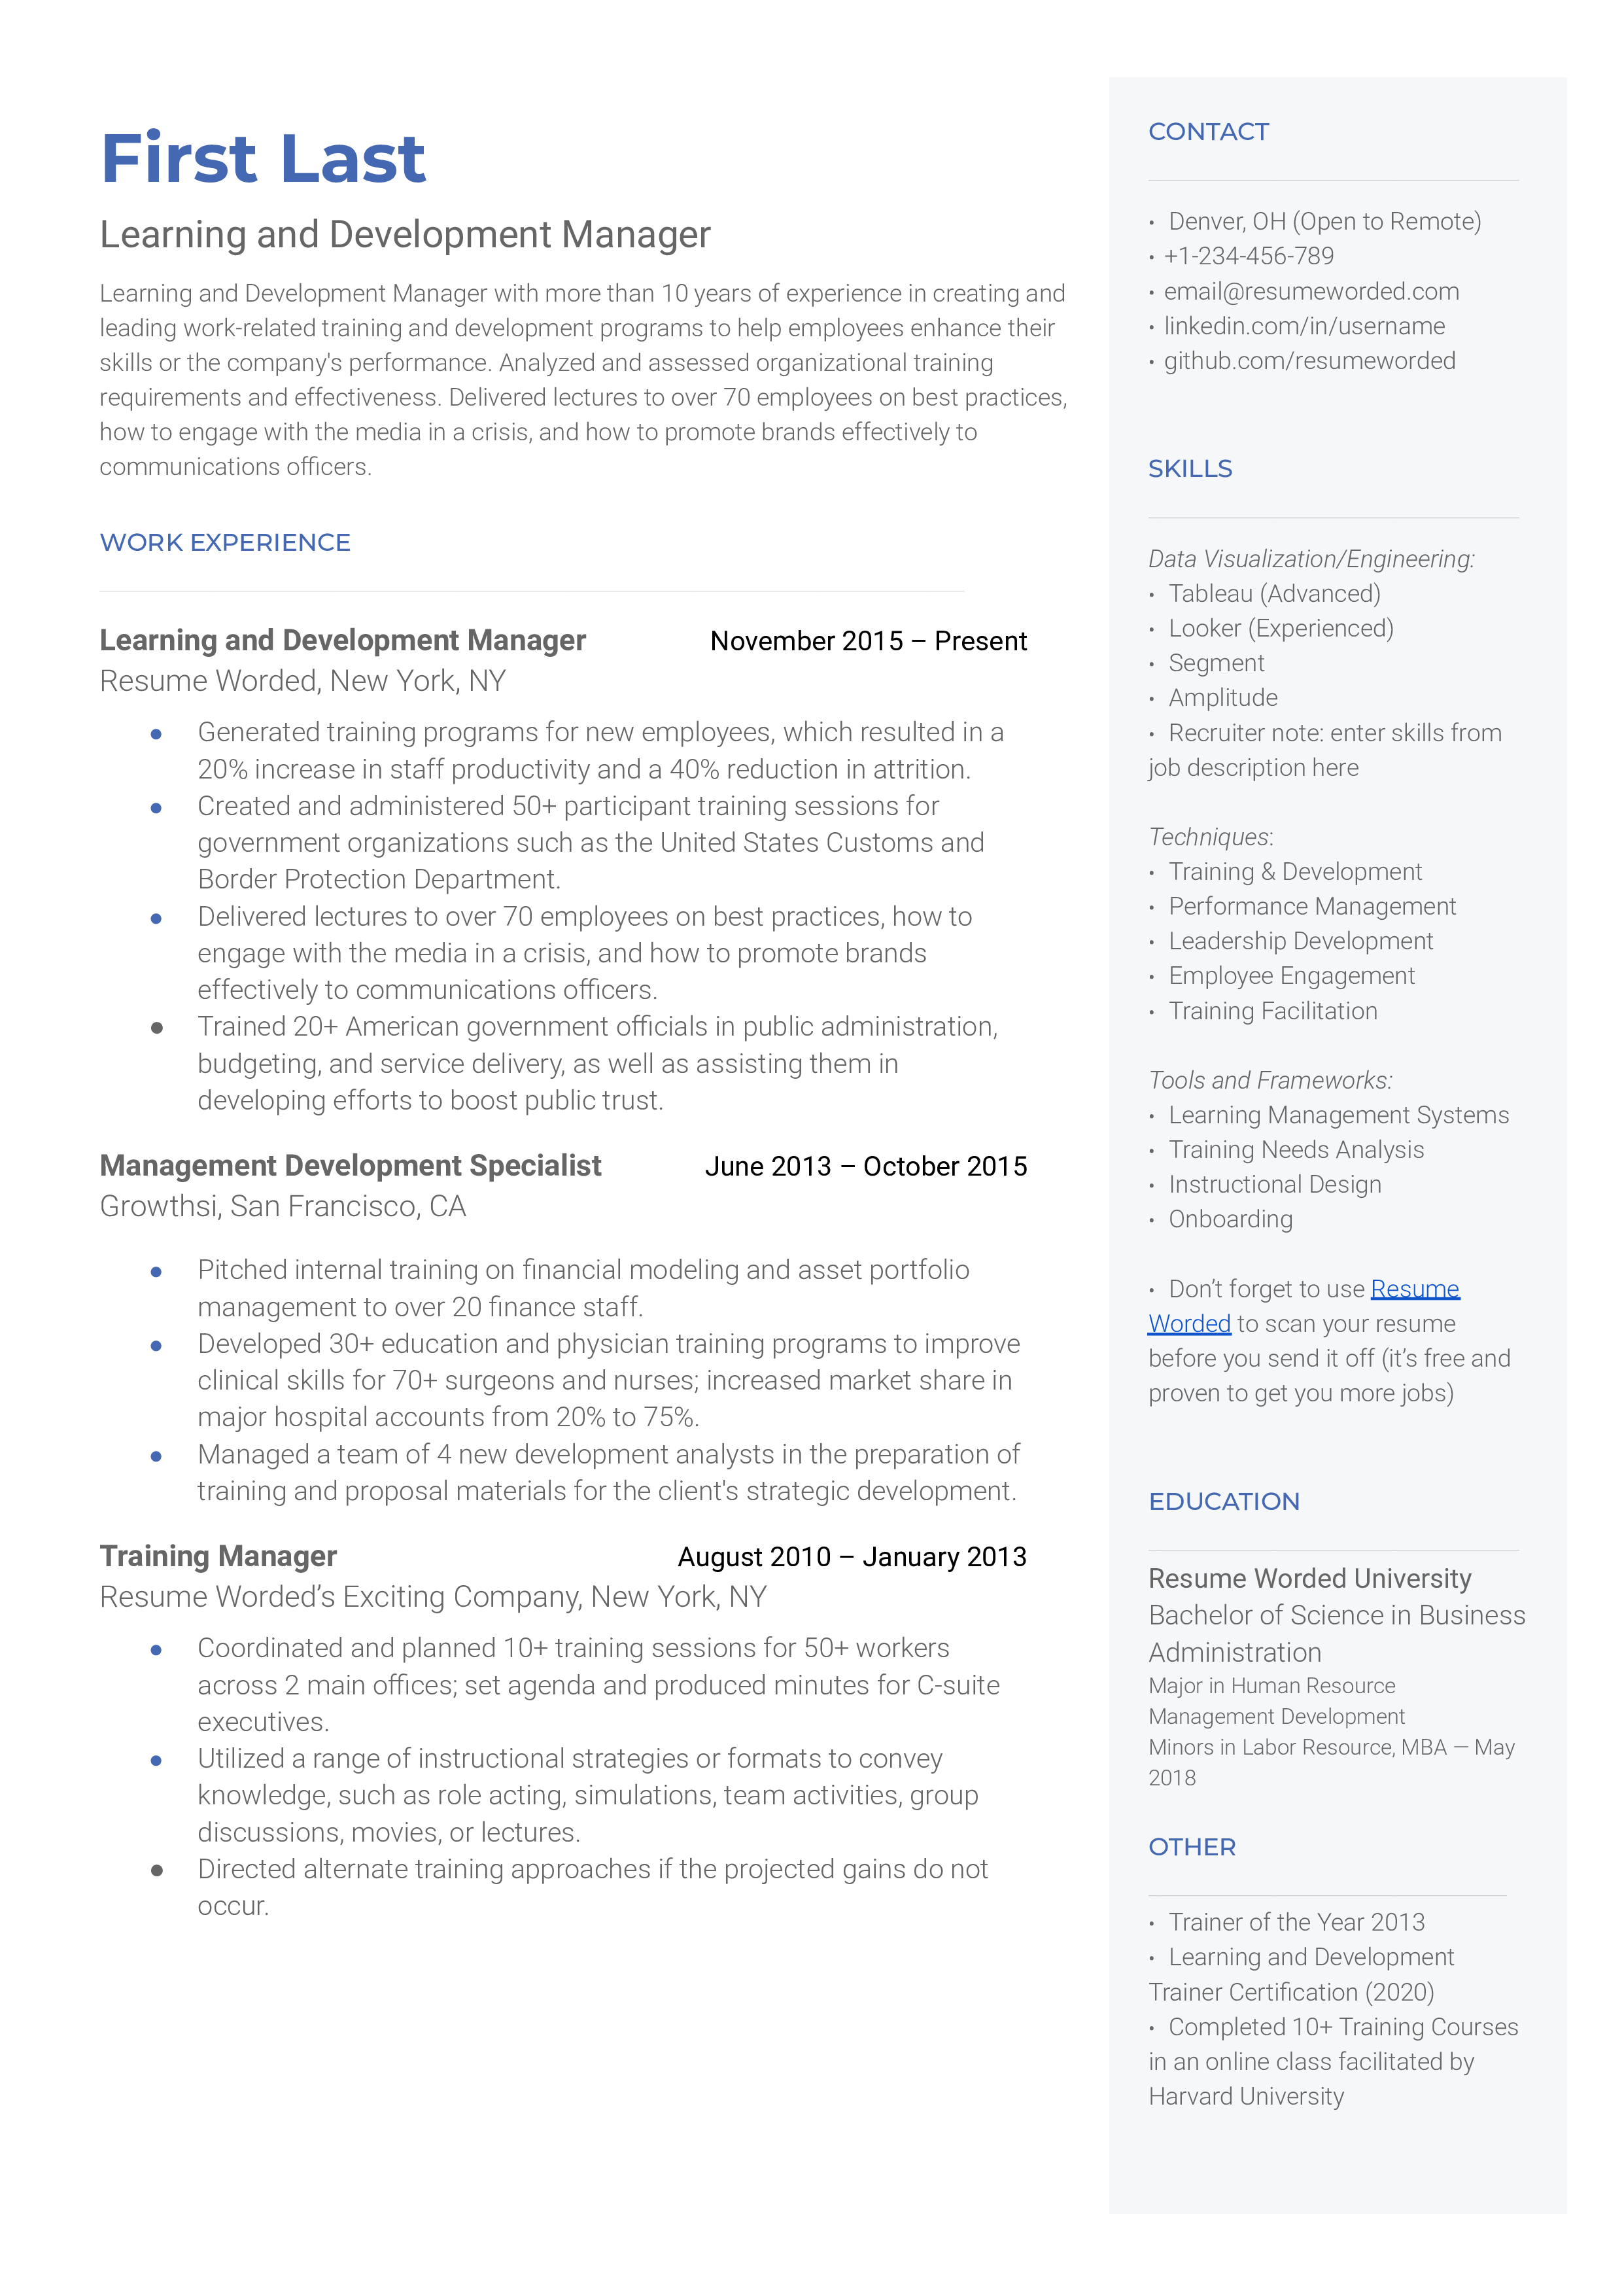 Learning and Development Manager Resume Sample